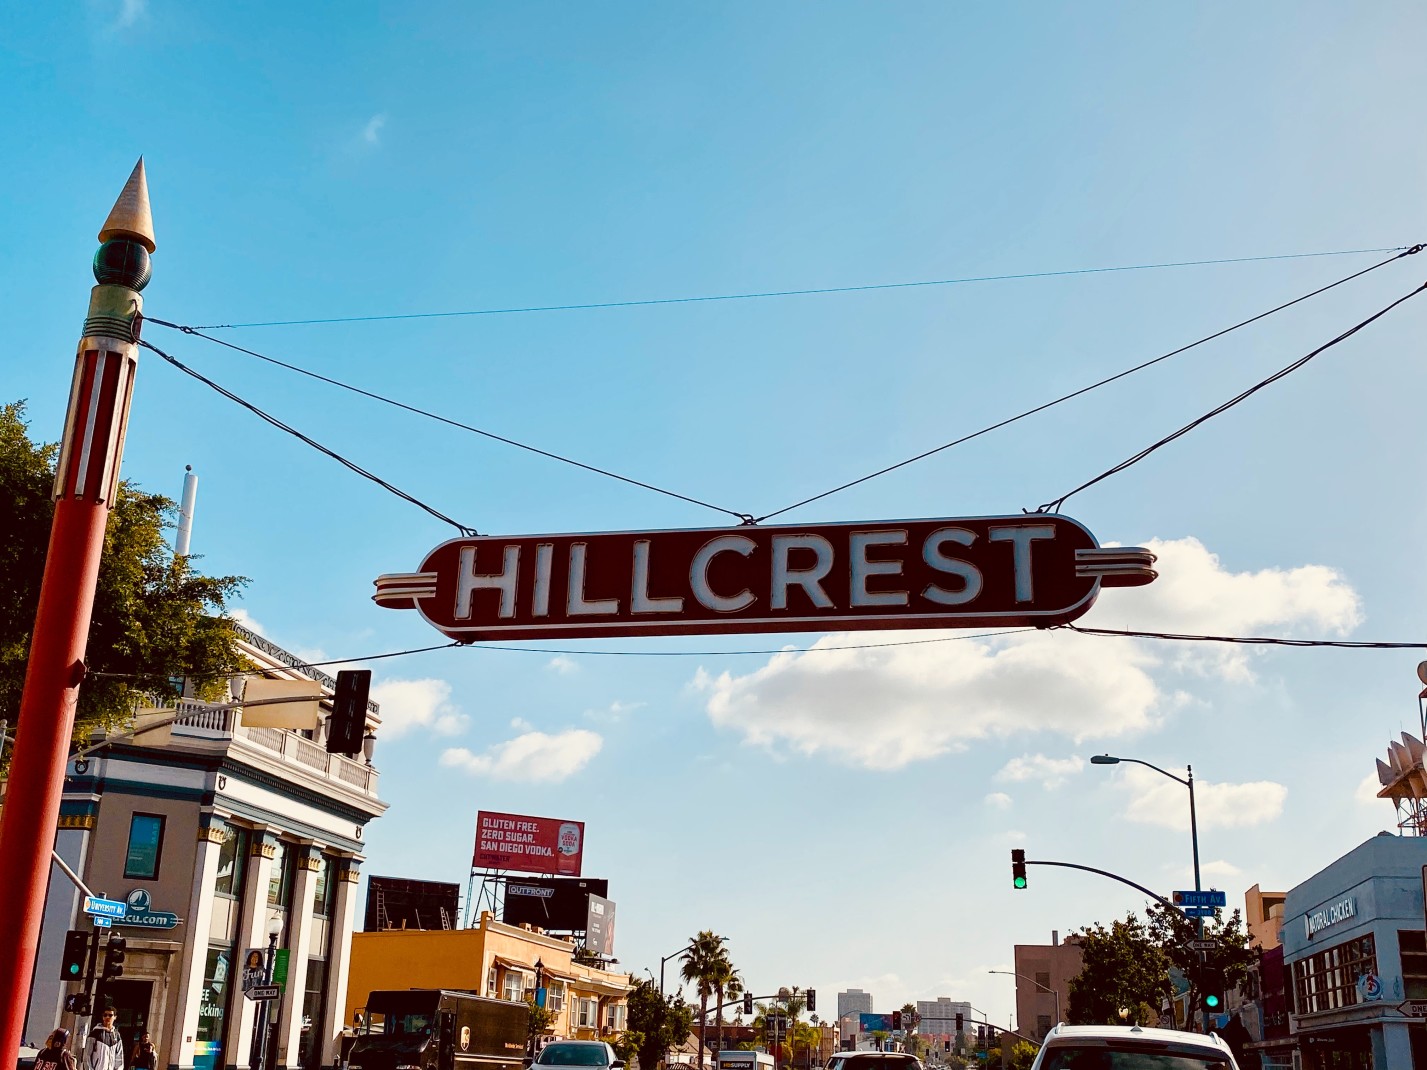 Hillcrest sign in San Diego, California